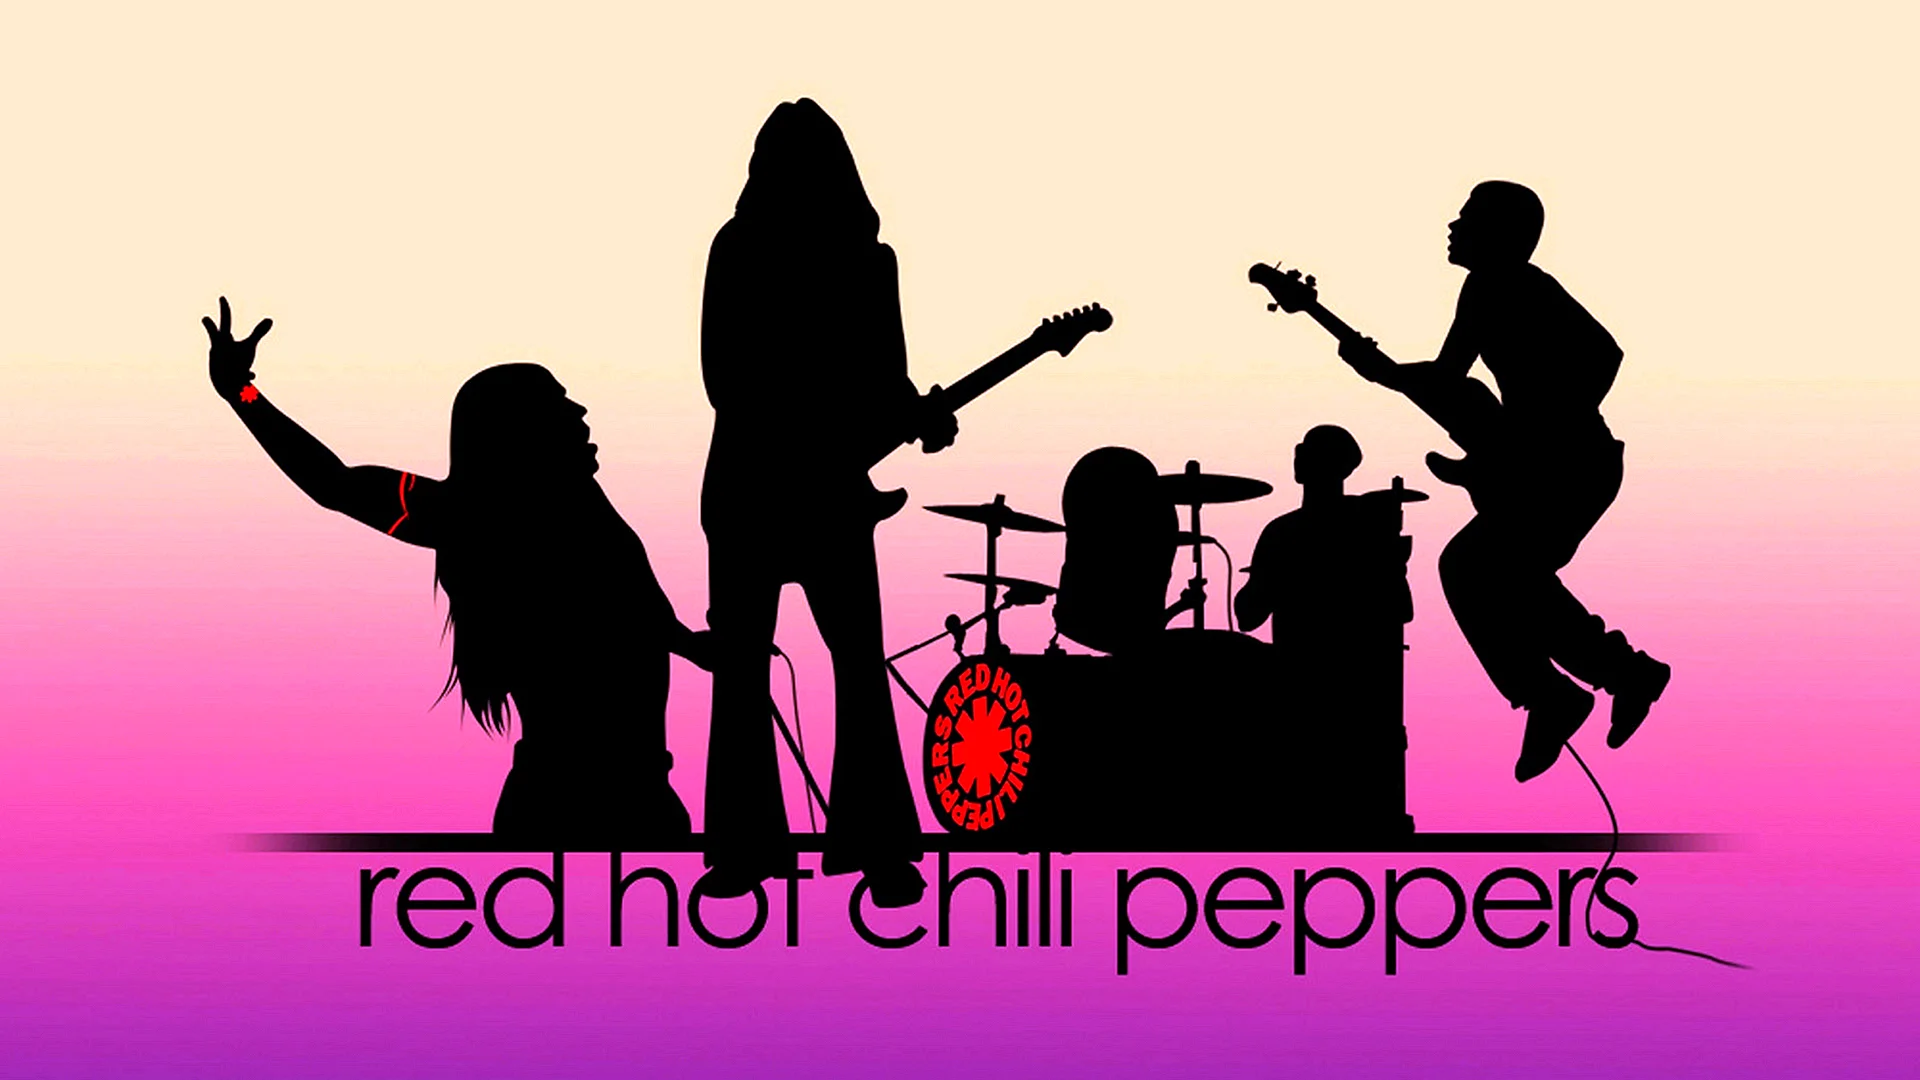 Red Hot Chili Peppers Art Wallpaper